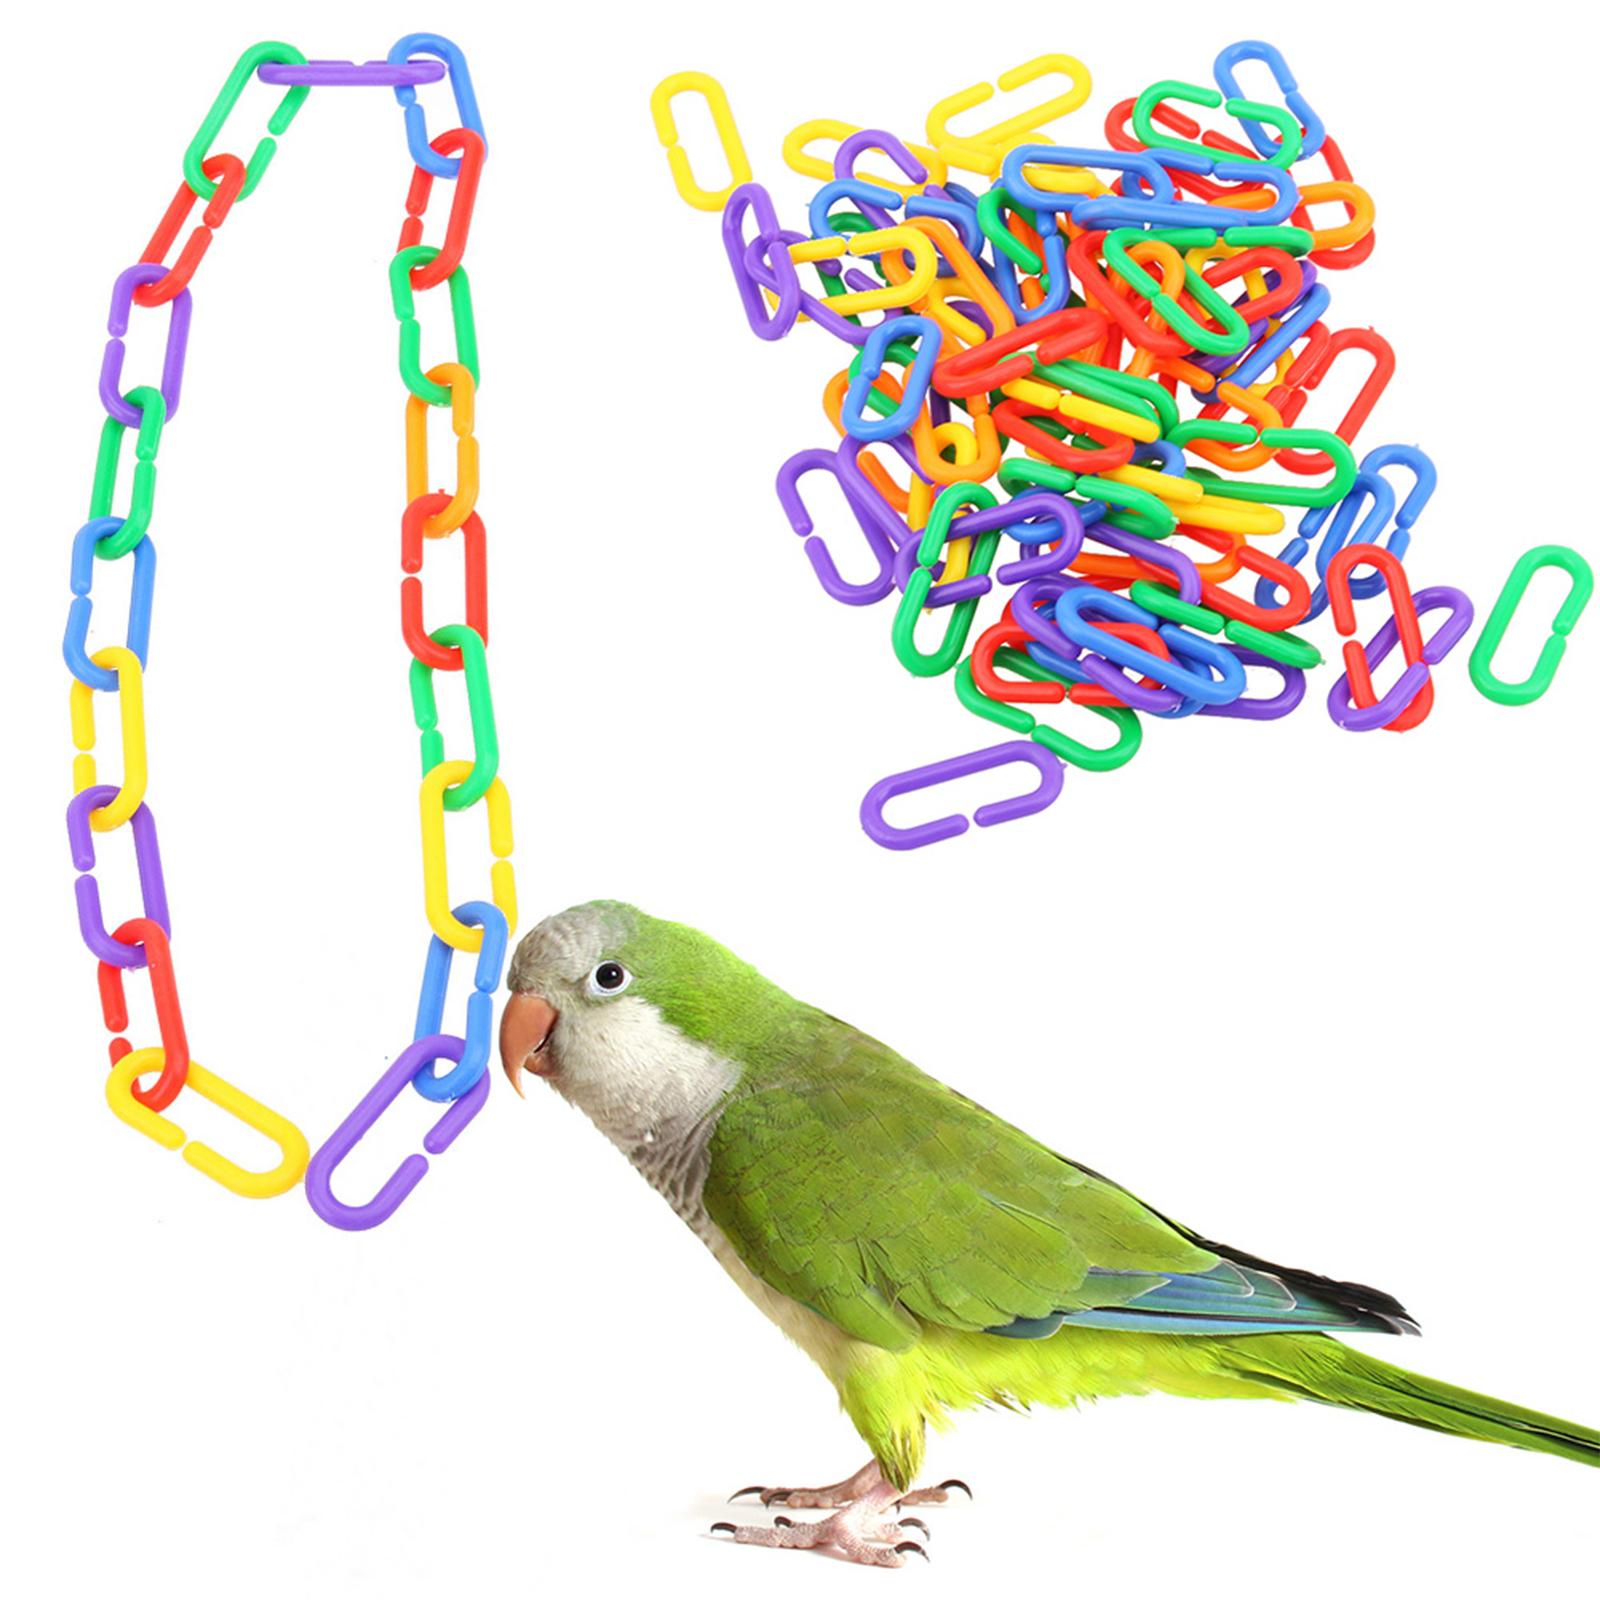 100 Durable Plastic Counting C Chain Sugar Glider Parrot Bird Toy Parts